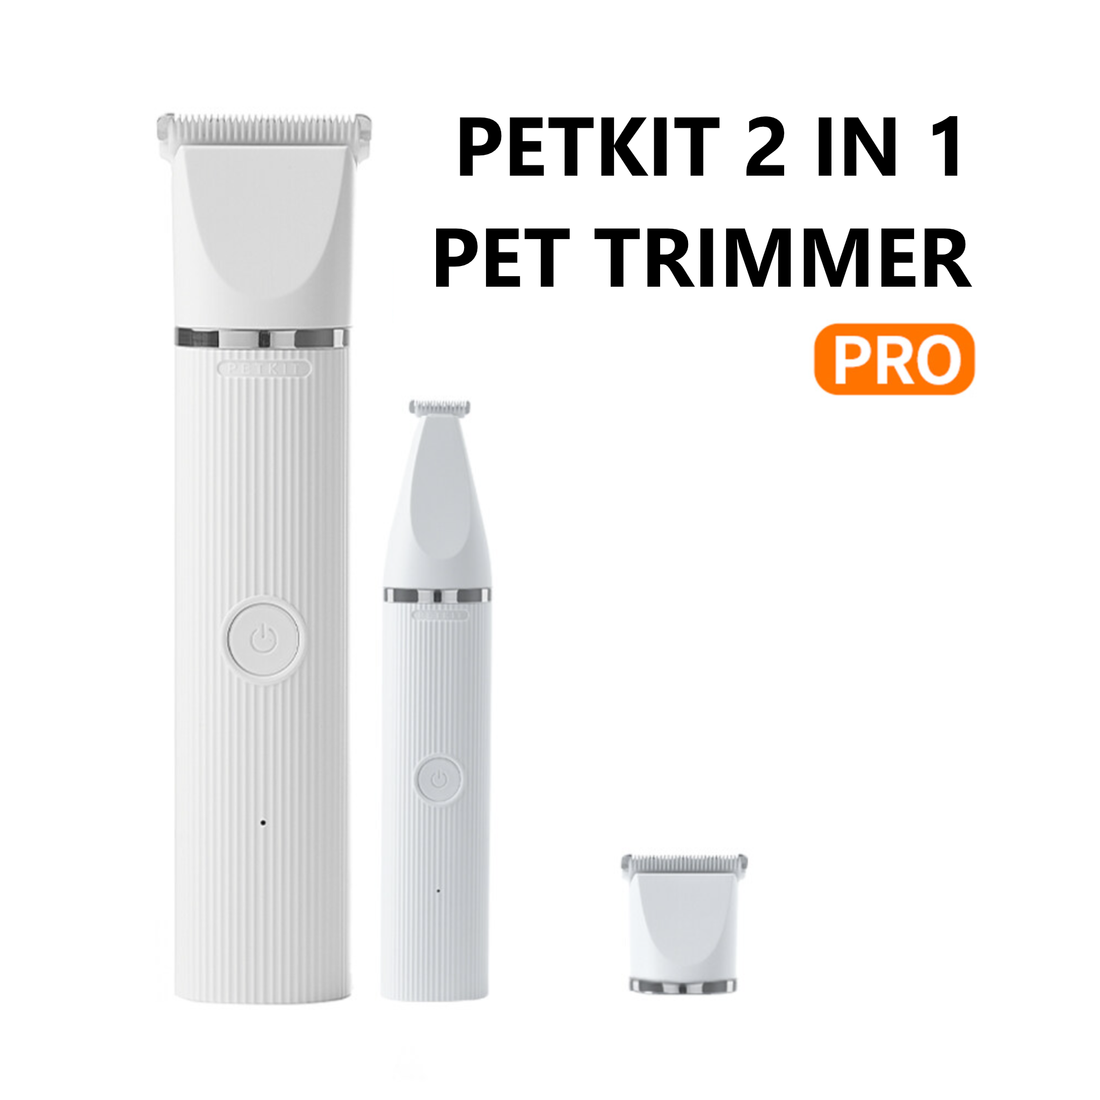 PETKIT 2 in 1 Pet Trimmer Pro for Cats and Dogs